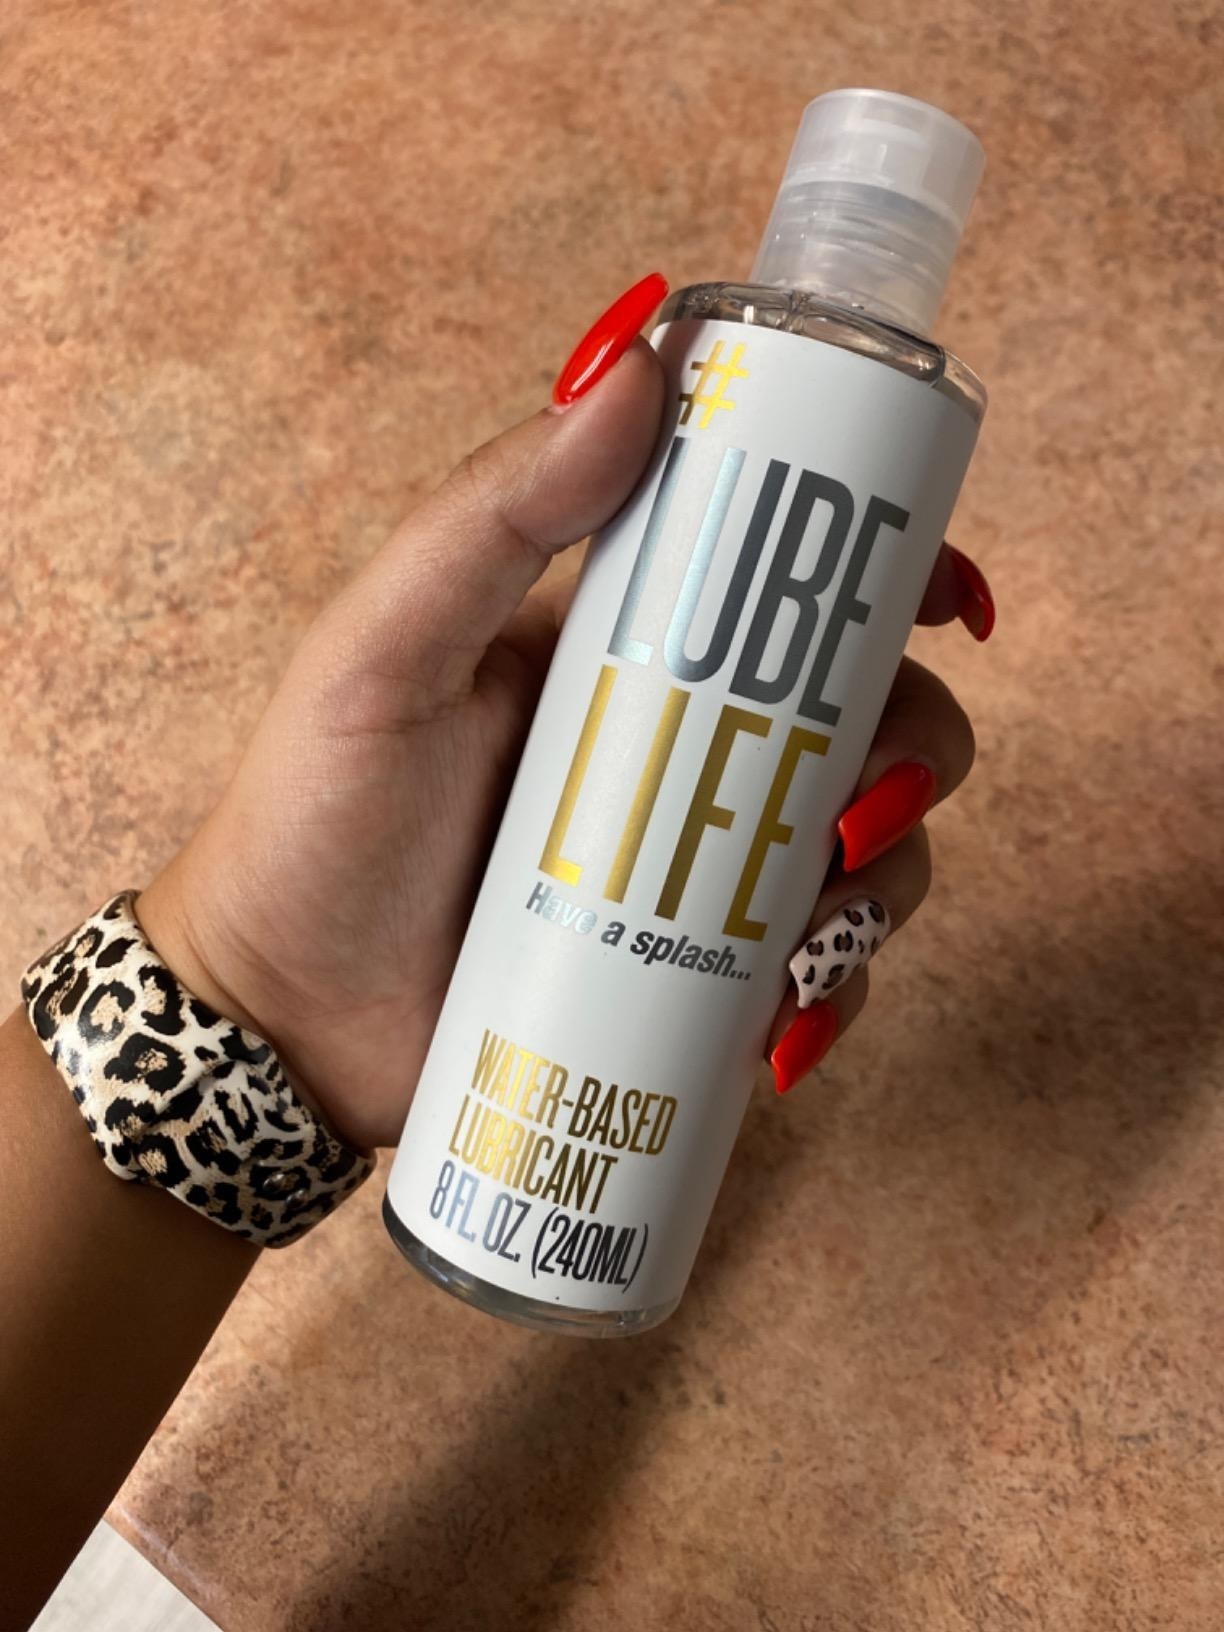 Manicured hand holding bottle of Lube Life lubricant